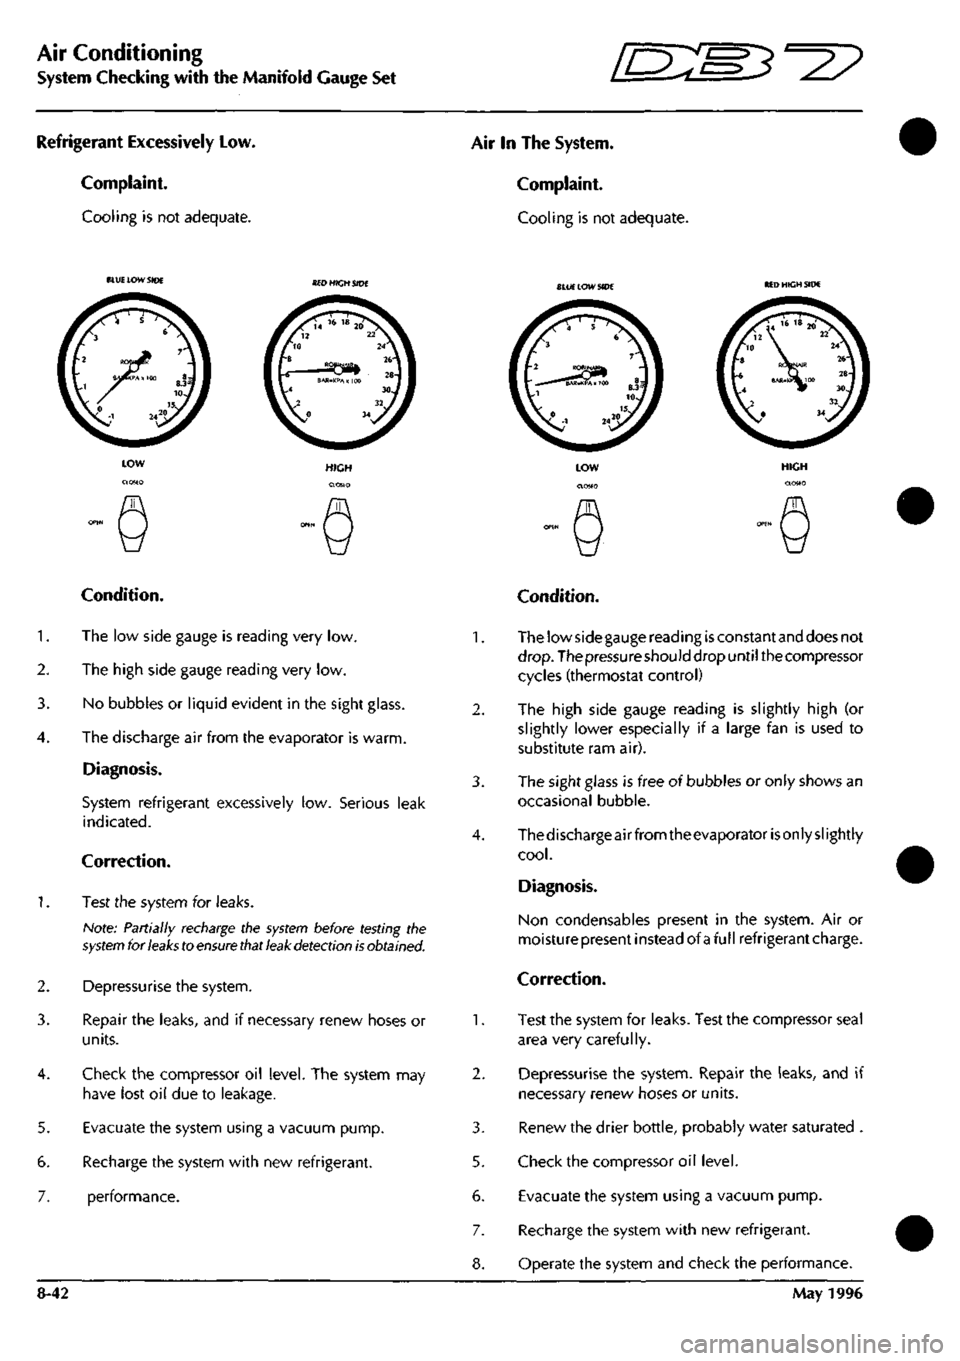 ASTON MARTIN DB7 1997  Workshop Manual 
Air Conditioning 
System Checking with the Manifold Gauge Set [n::S3^^? 
Refrigerant Excessively Low. 
Complaint. 
Cooling is not adequate. 
Air In The System. 
Complaint. 
Cooling is not adequate. 
